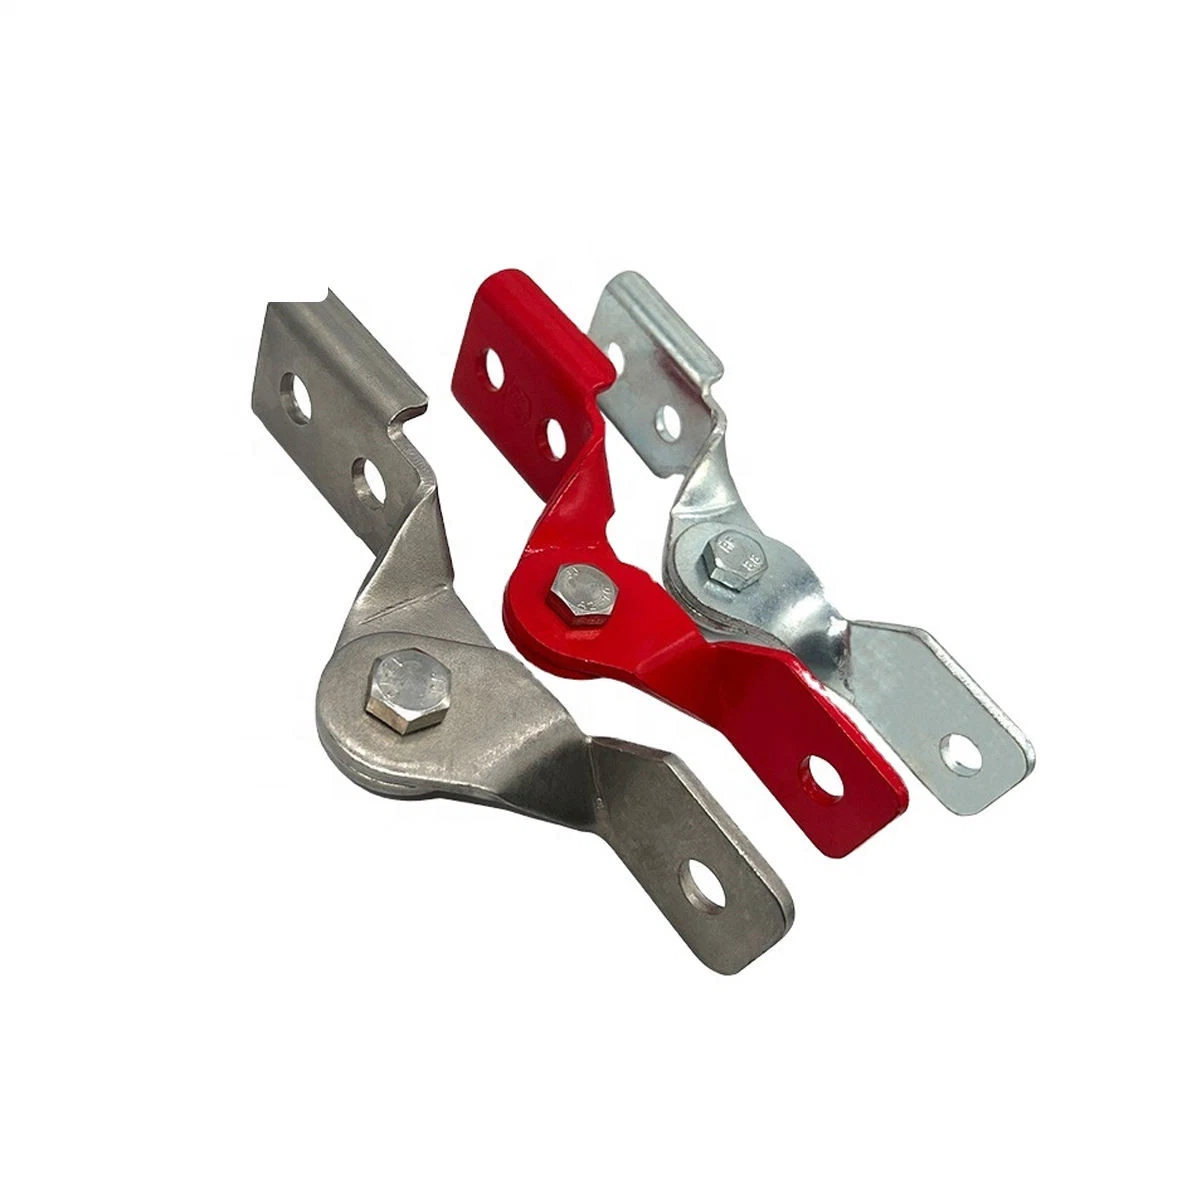 Galvanized Steel Seismic Hinge Electric System C Channel Seismic Bracing Support Connector